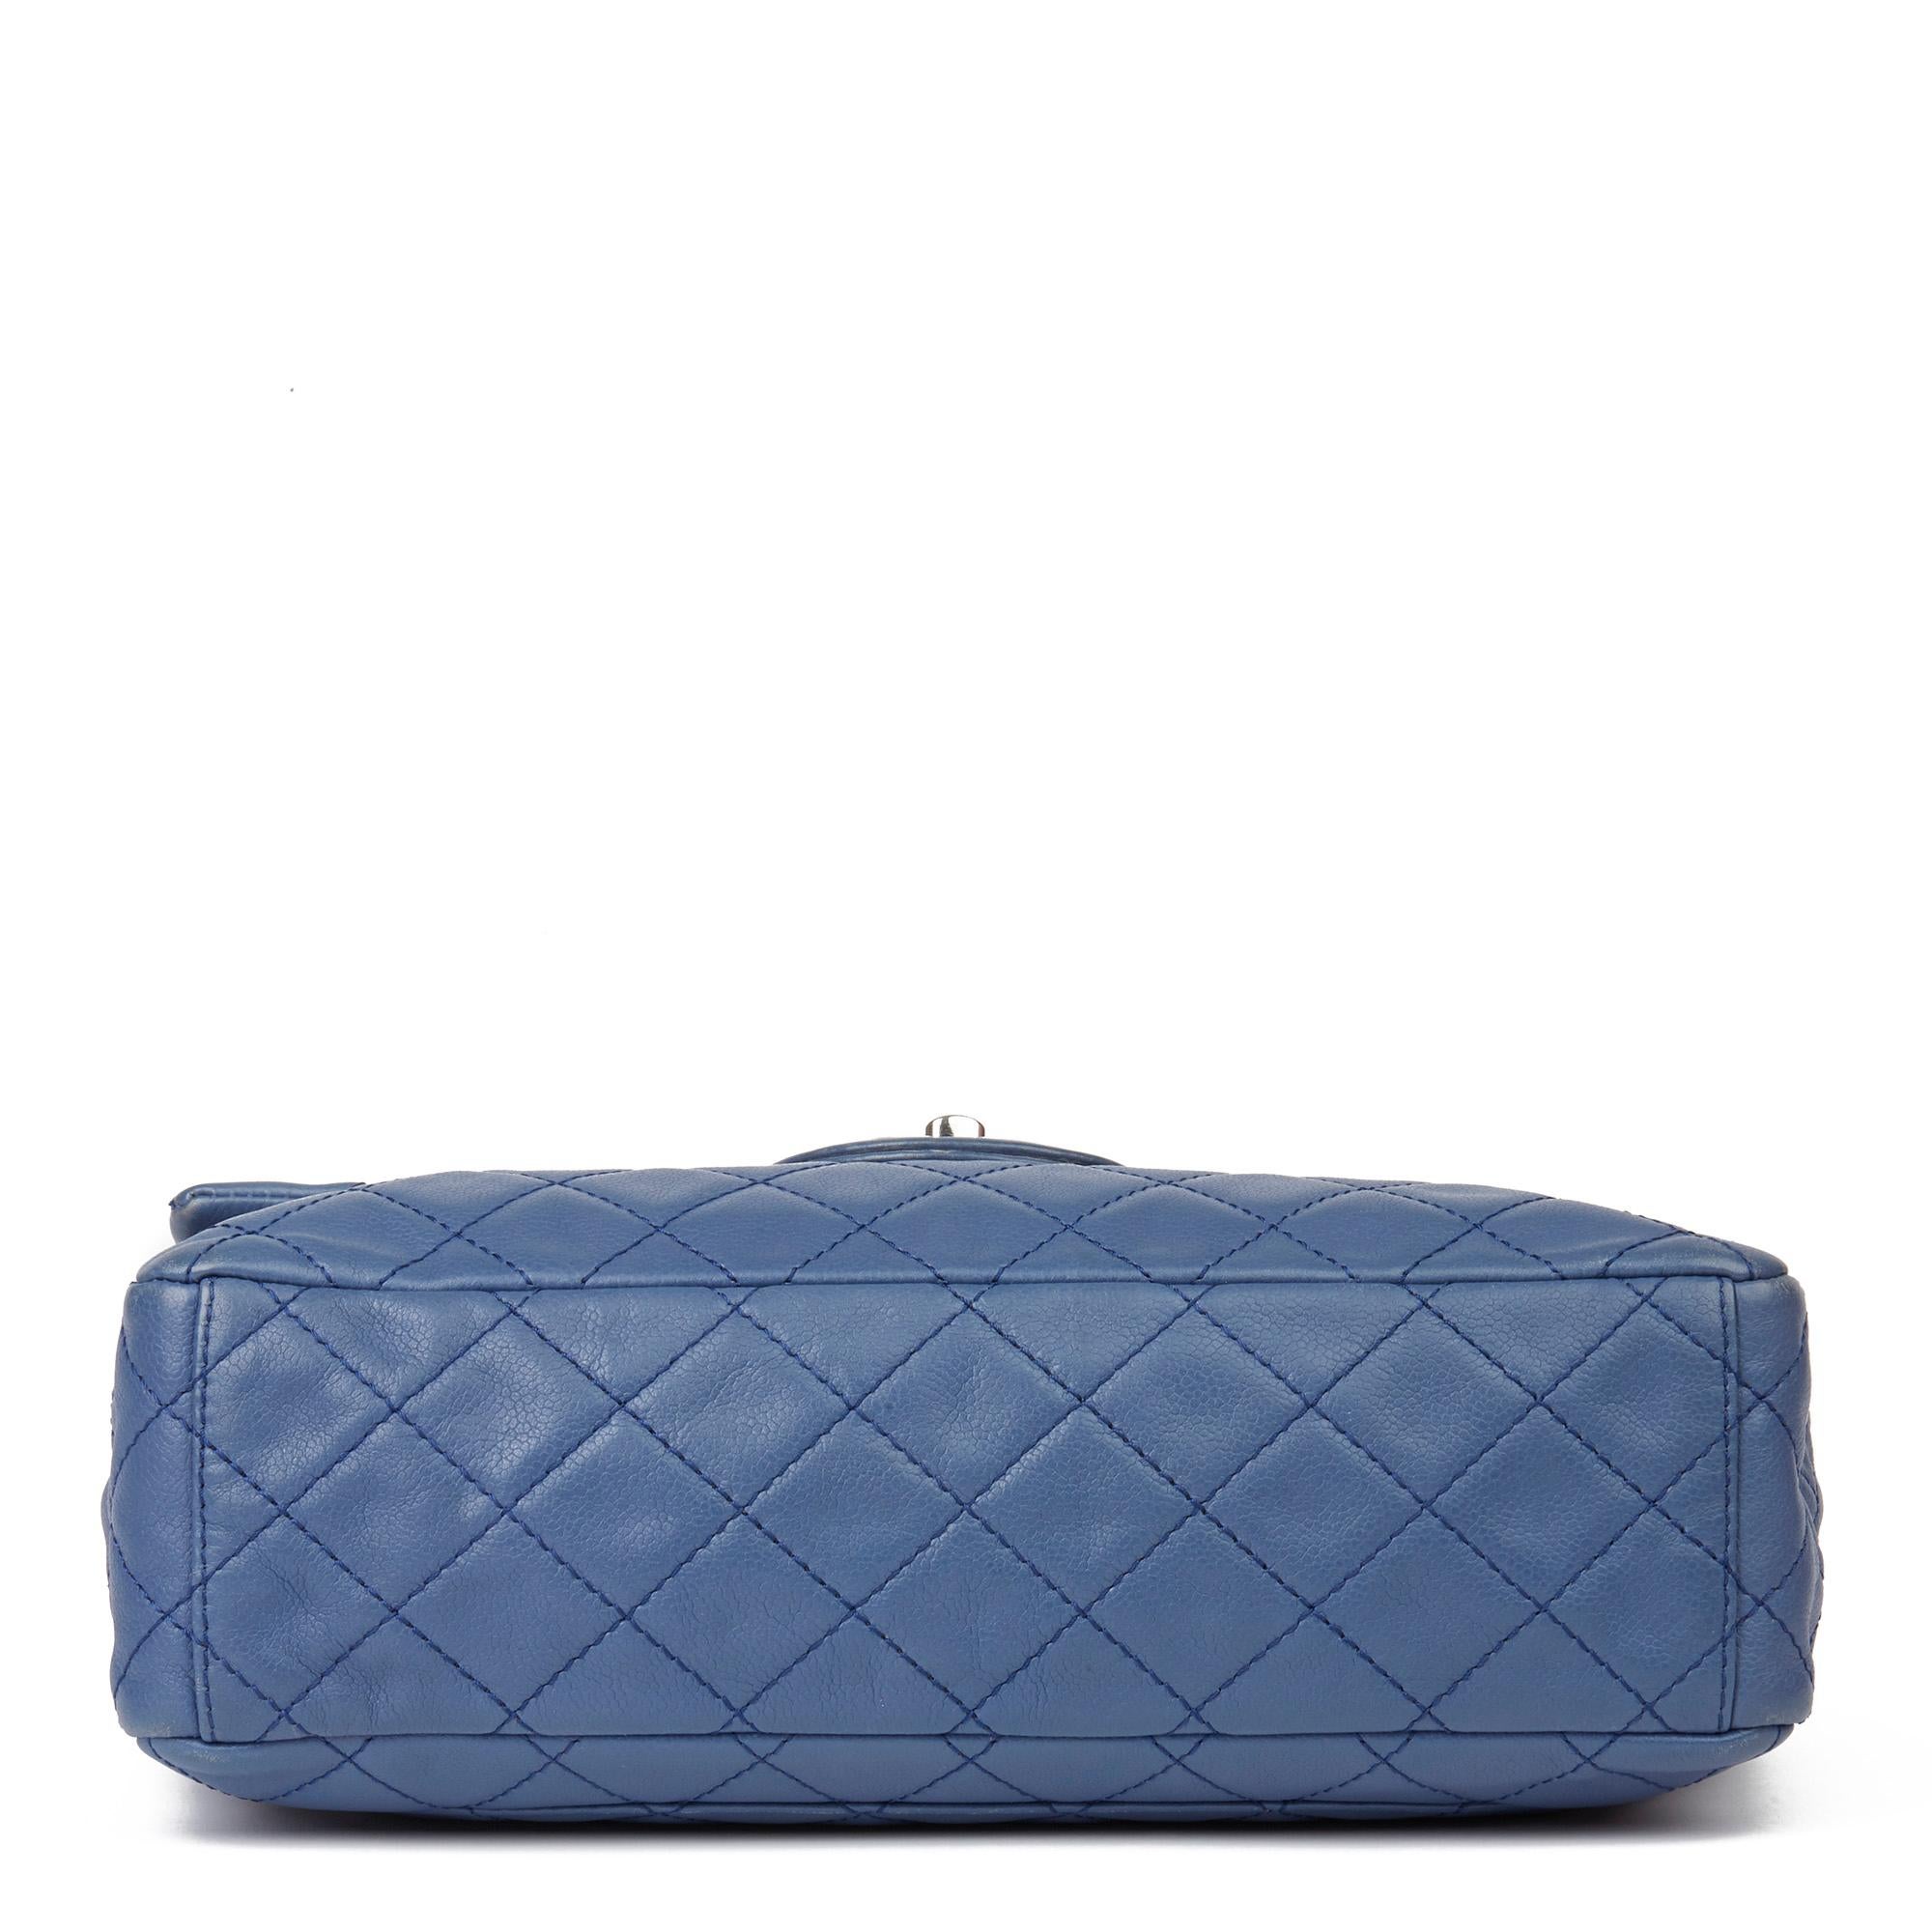 2008 Chanel Blue Quilted Caviar Leather Jumbo Classic Single Flap Bag 1